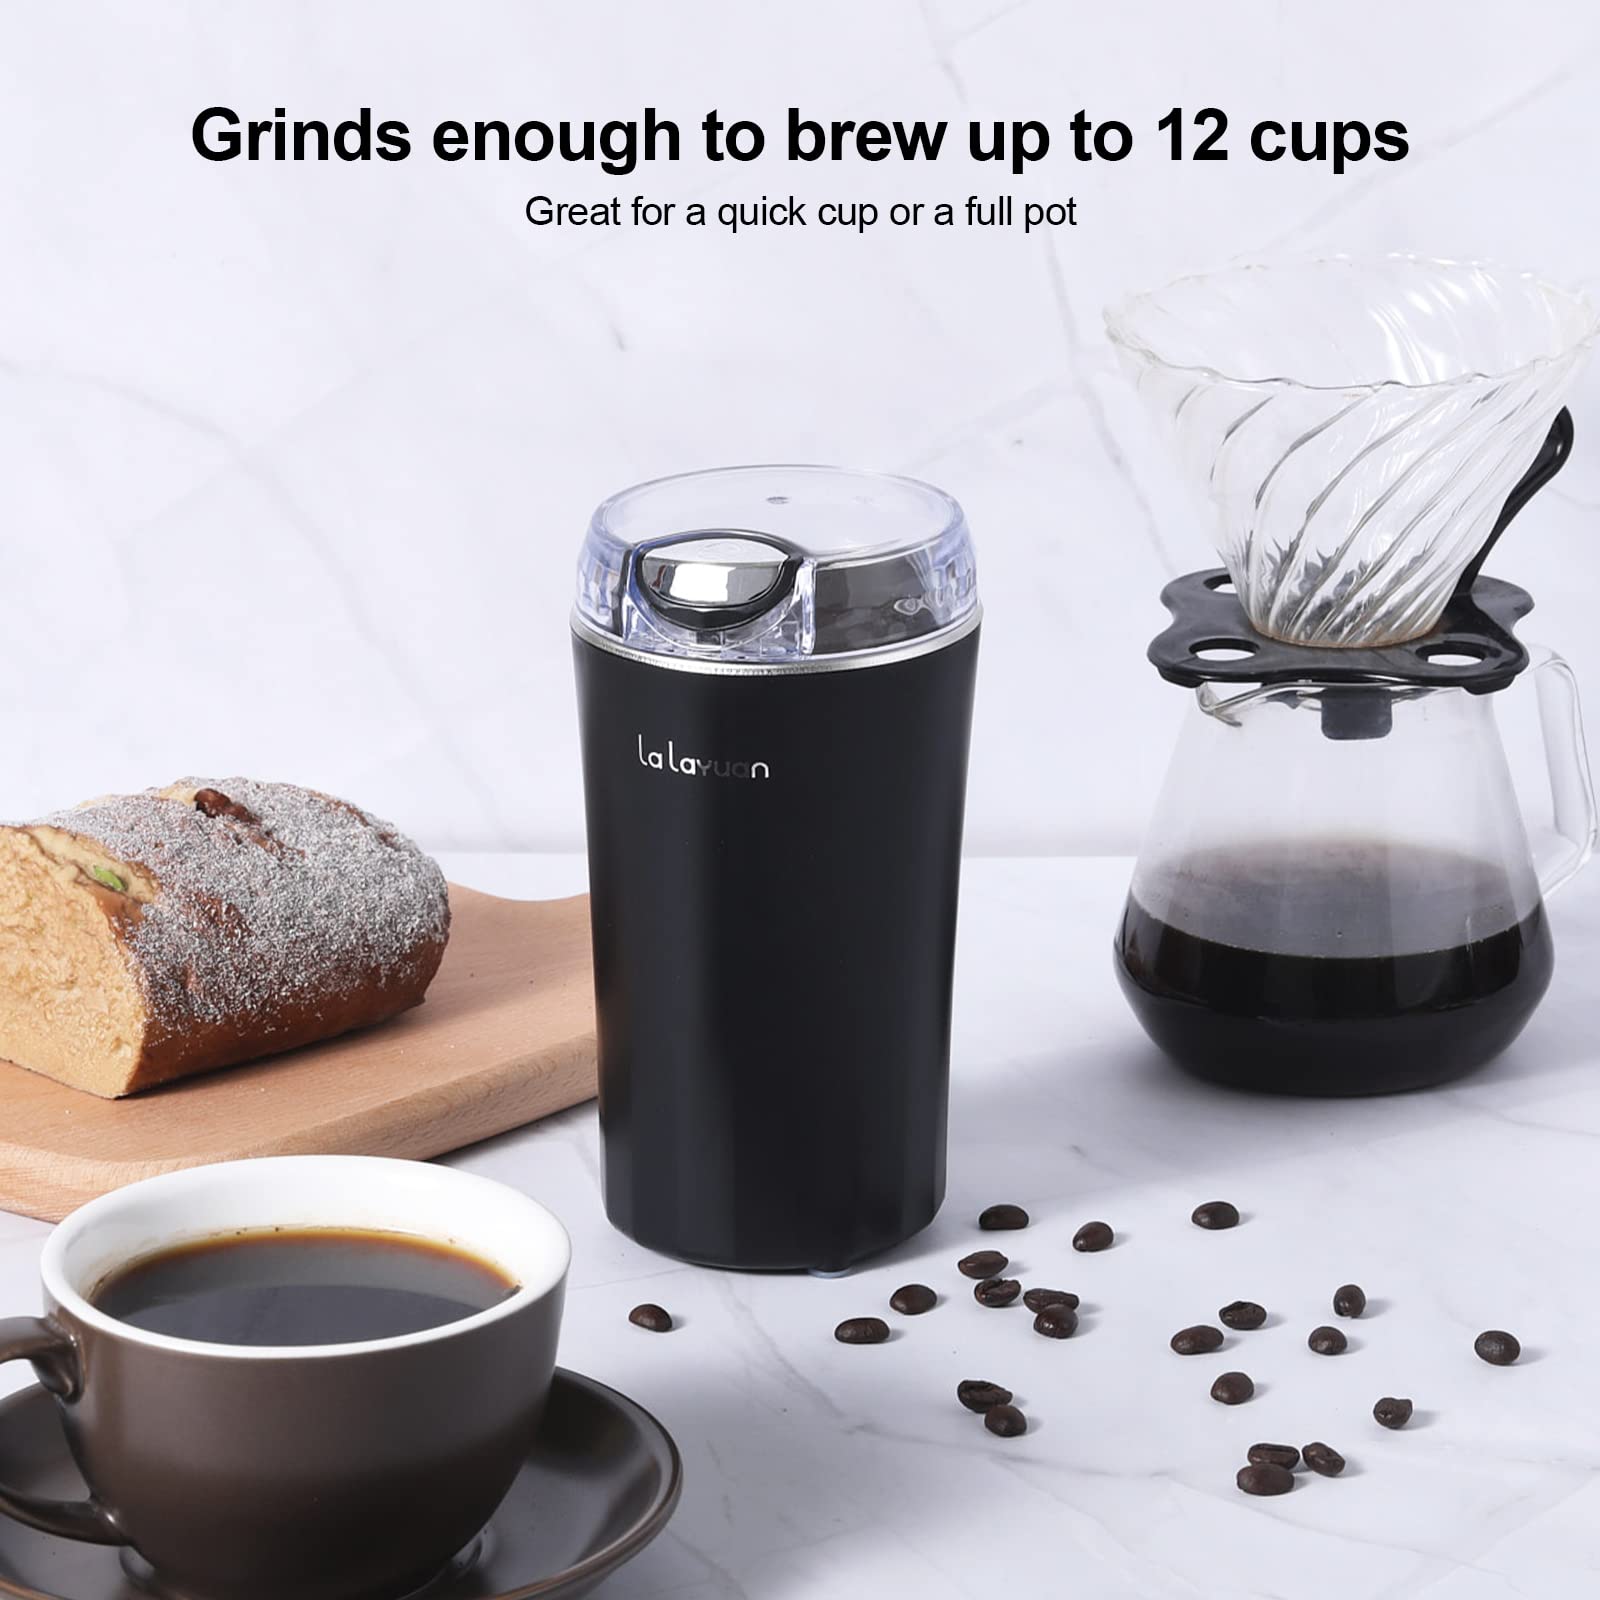 Coffee Grinder Electric,200W Powerful Spice Grinder, Espresso Grinder Herb Grinder Coffee Bean Grinder Electric for Spices,Herbs,Nuts with Brush,One Touch Push-Button Control,12 Cups/2.7oz,Black